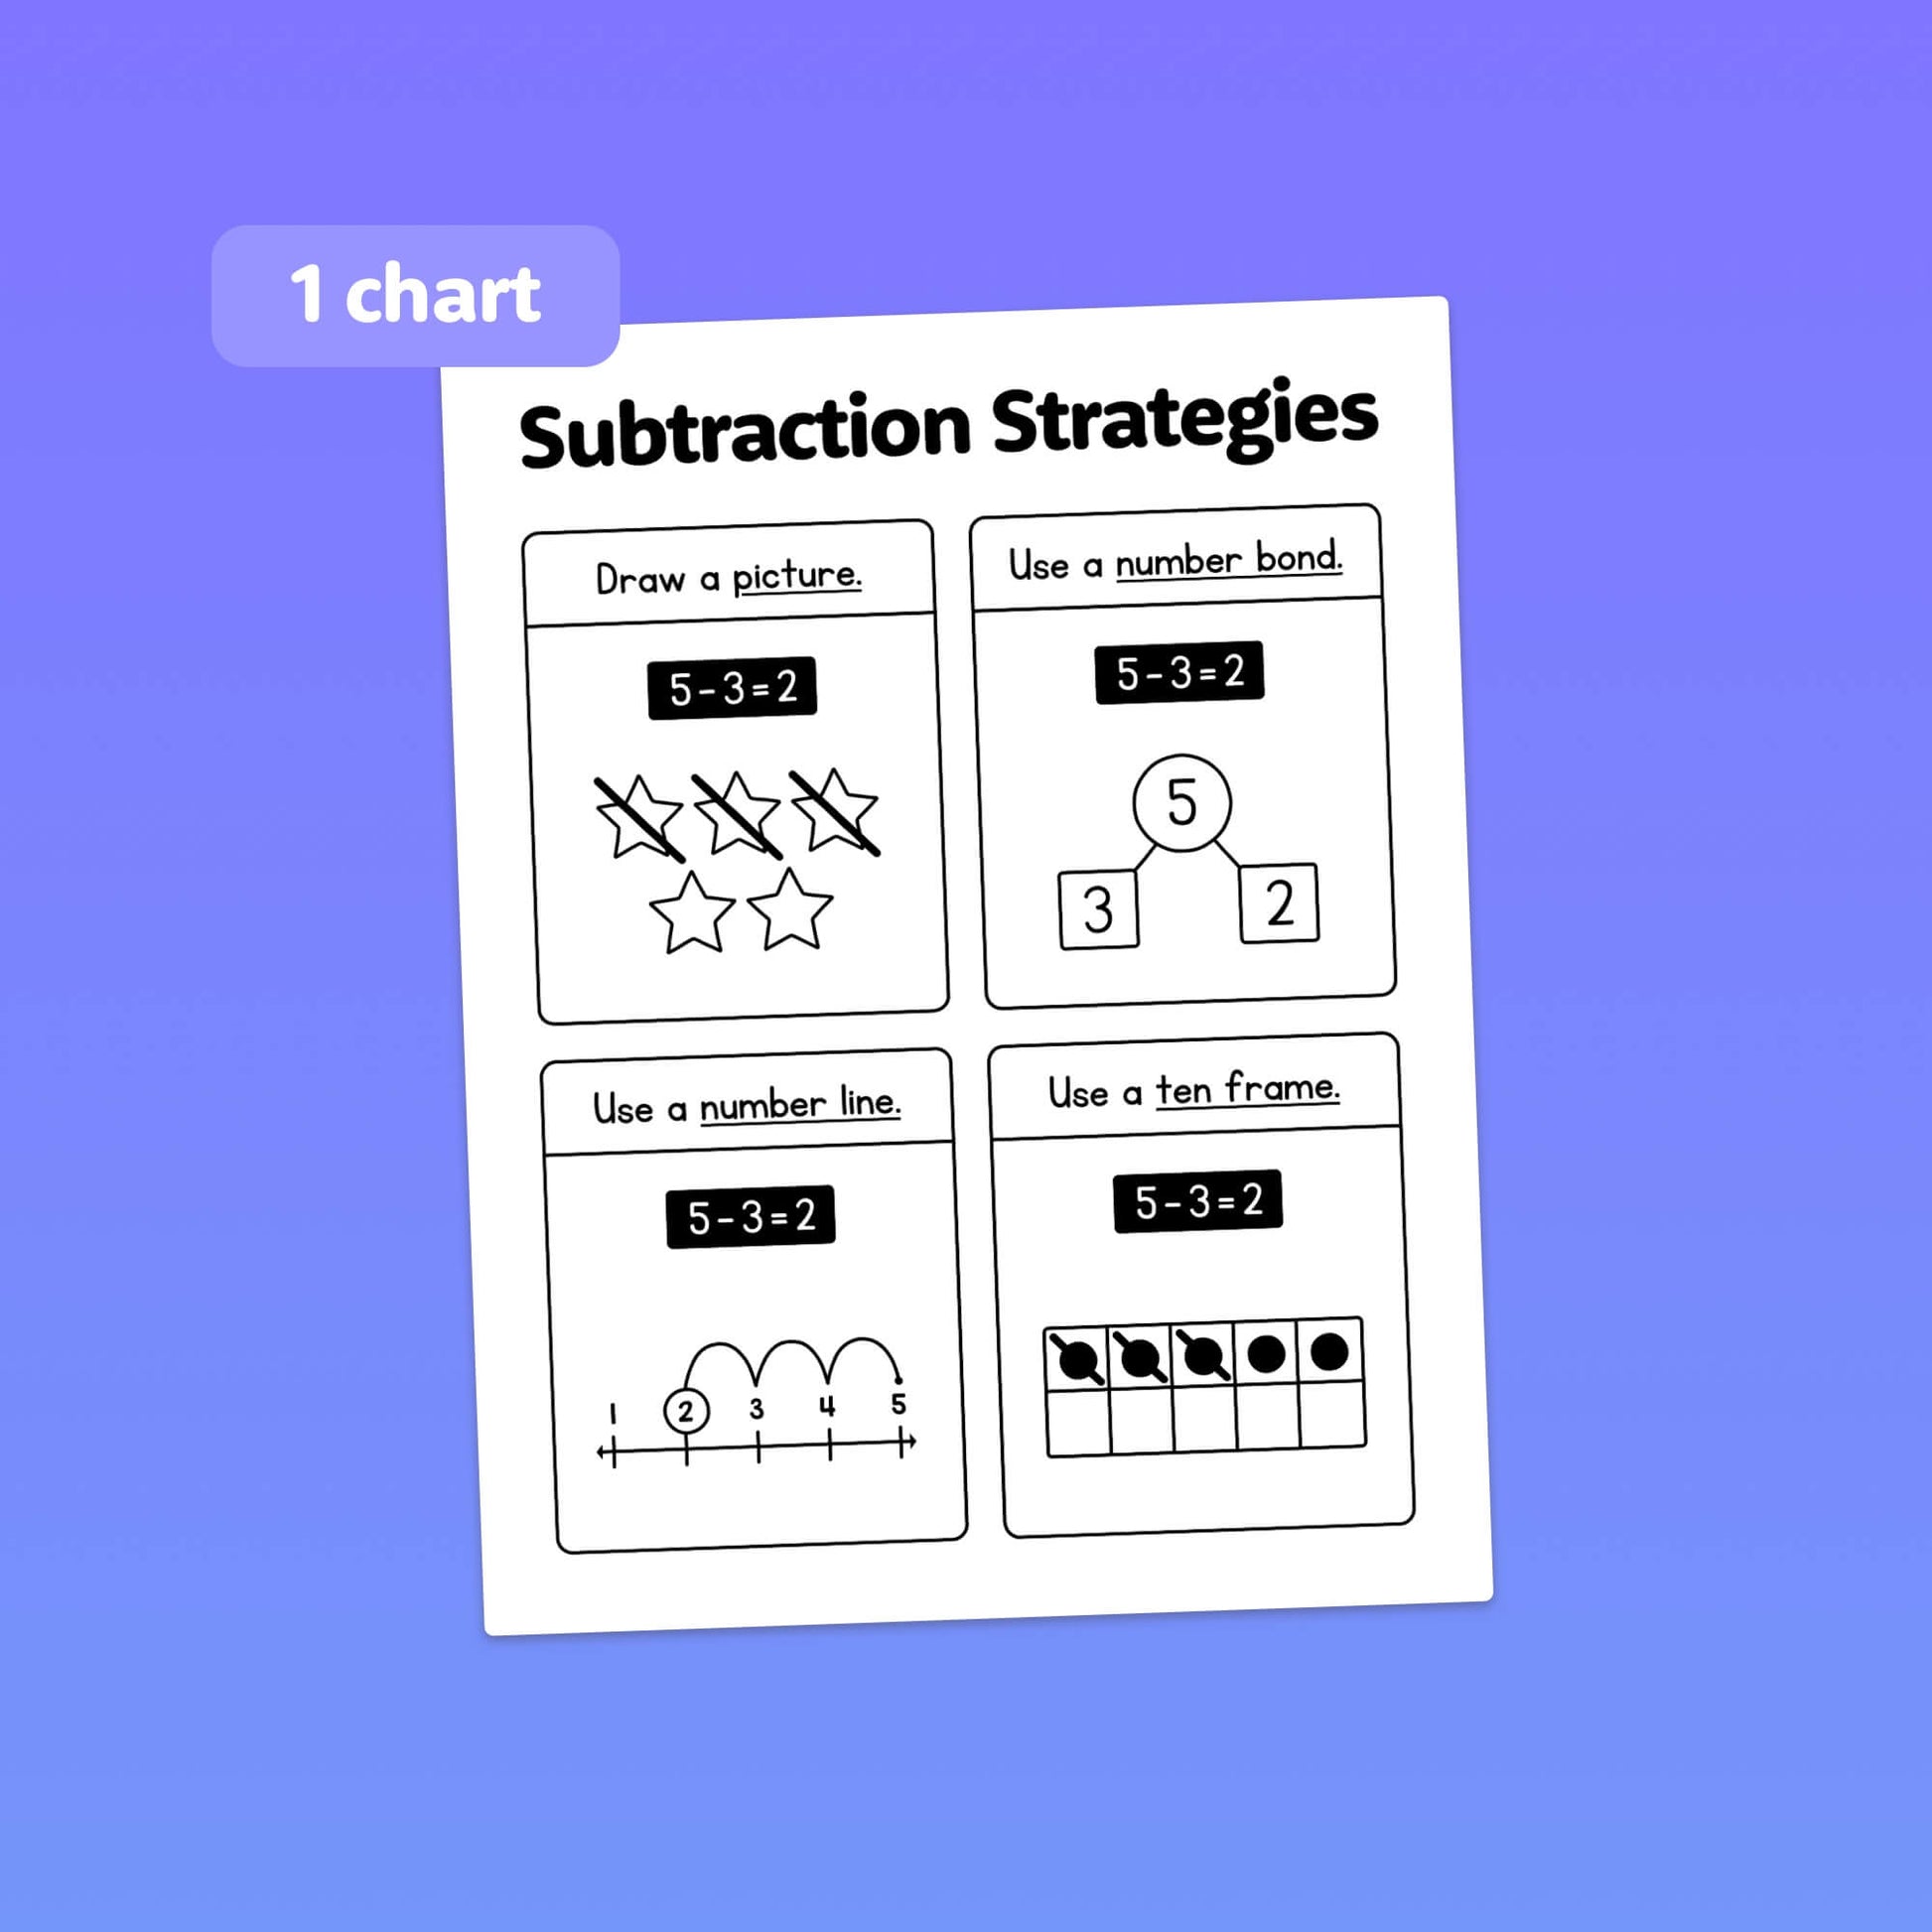 Subtraction strategies anchor chart